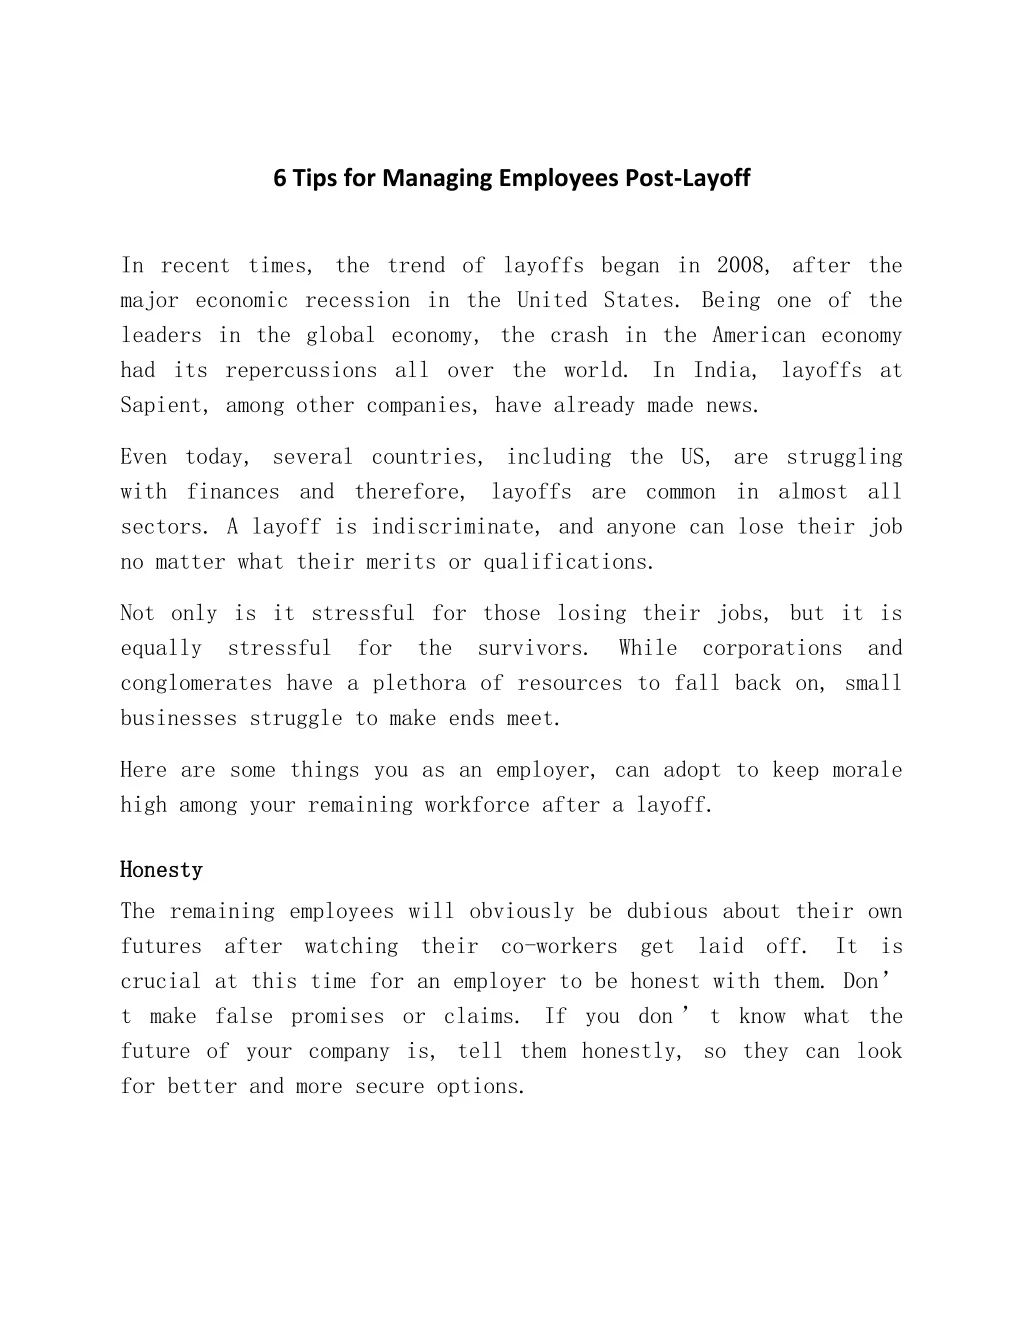 6 tips for managing employees post layoff